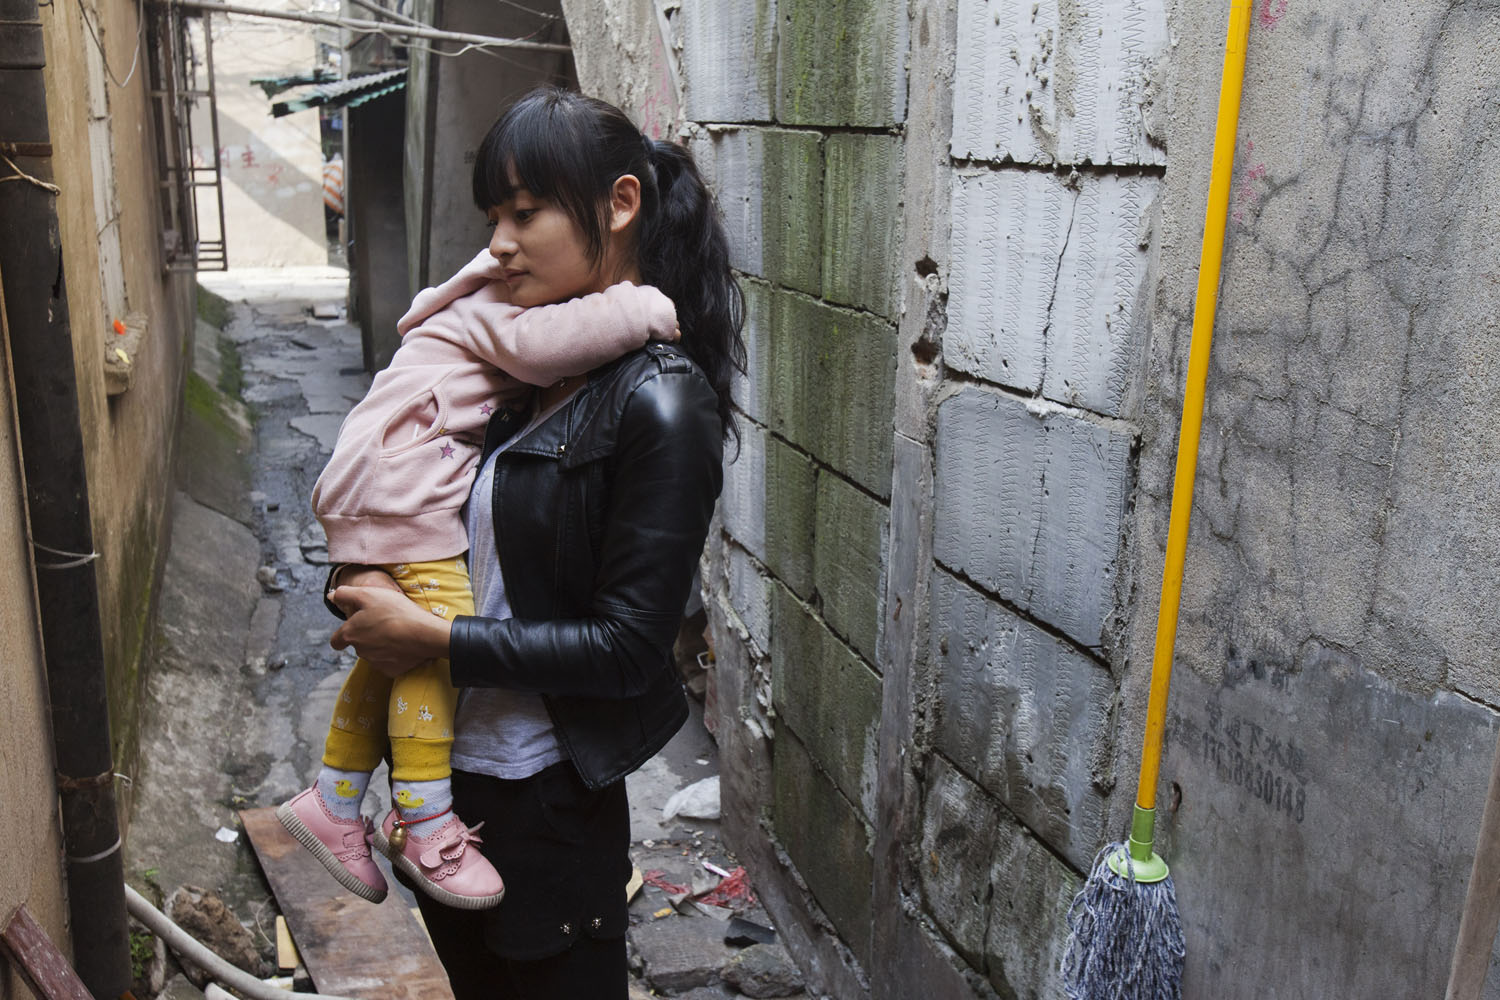   Woman and her child. Guangfu Road. Shanghai, China. 2015.